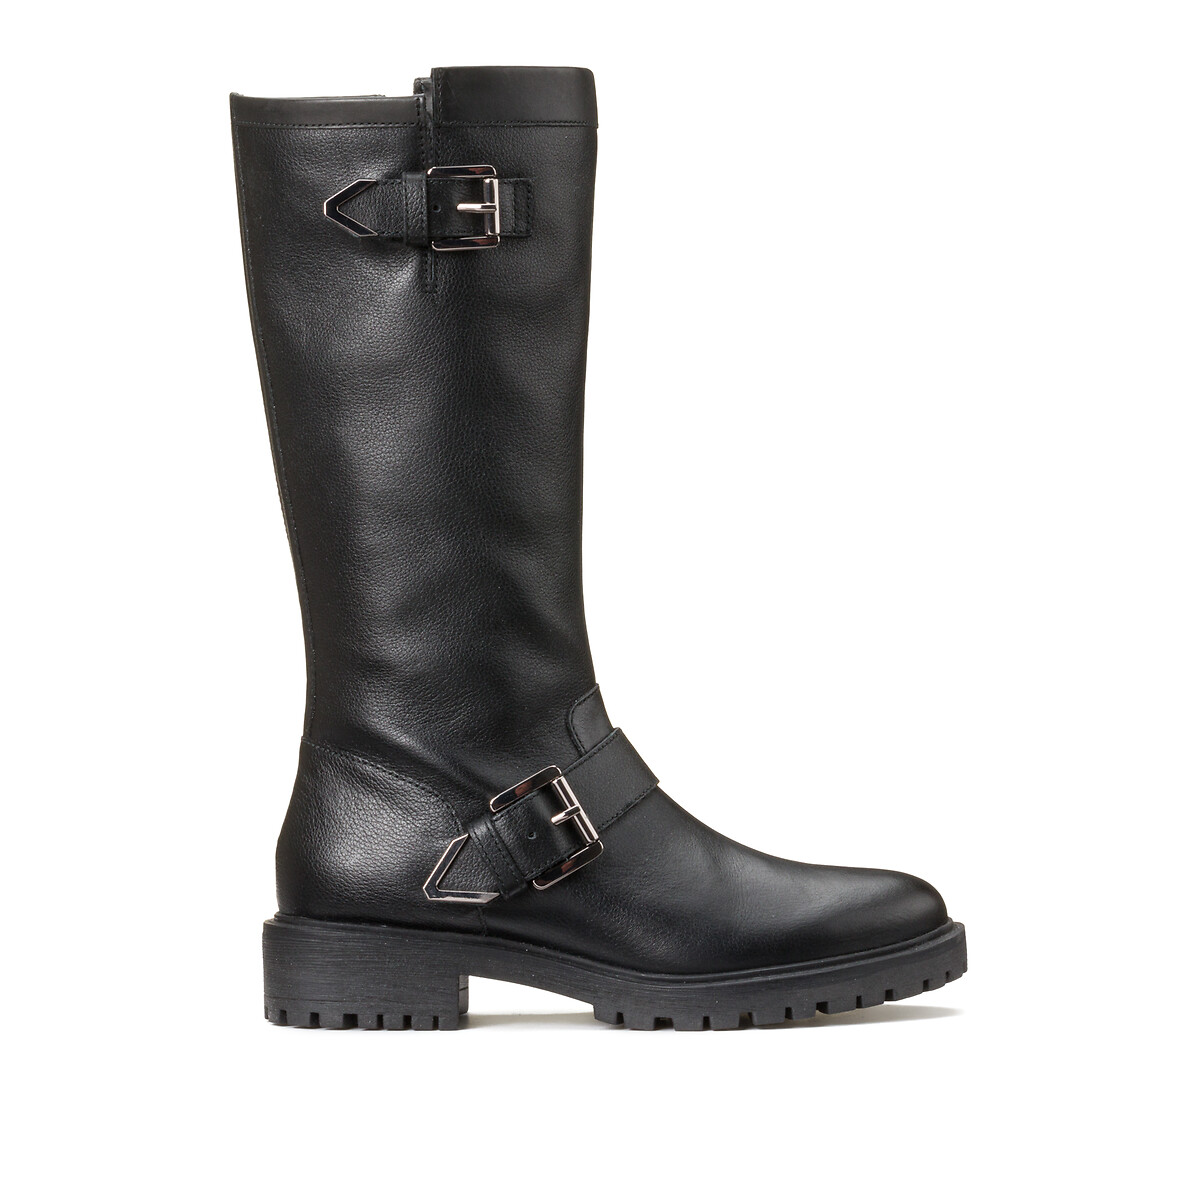 Hoara breathable calf boots in leather black Geox | La Redoute